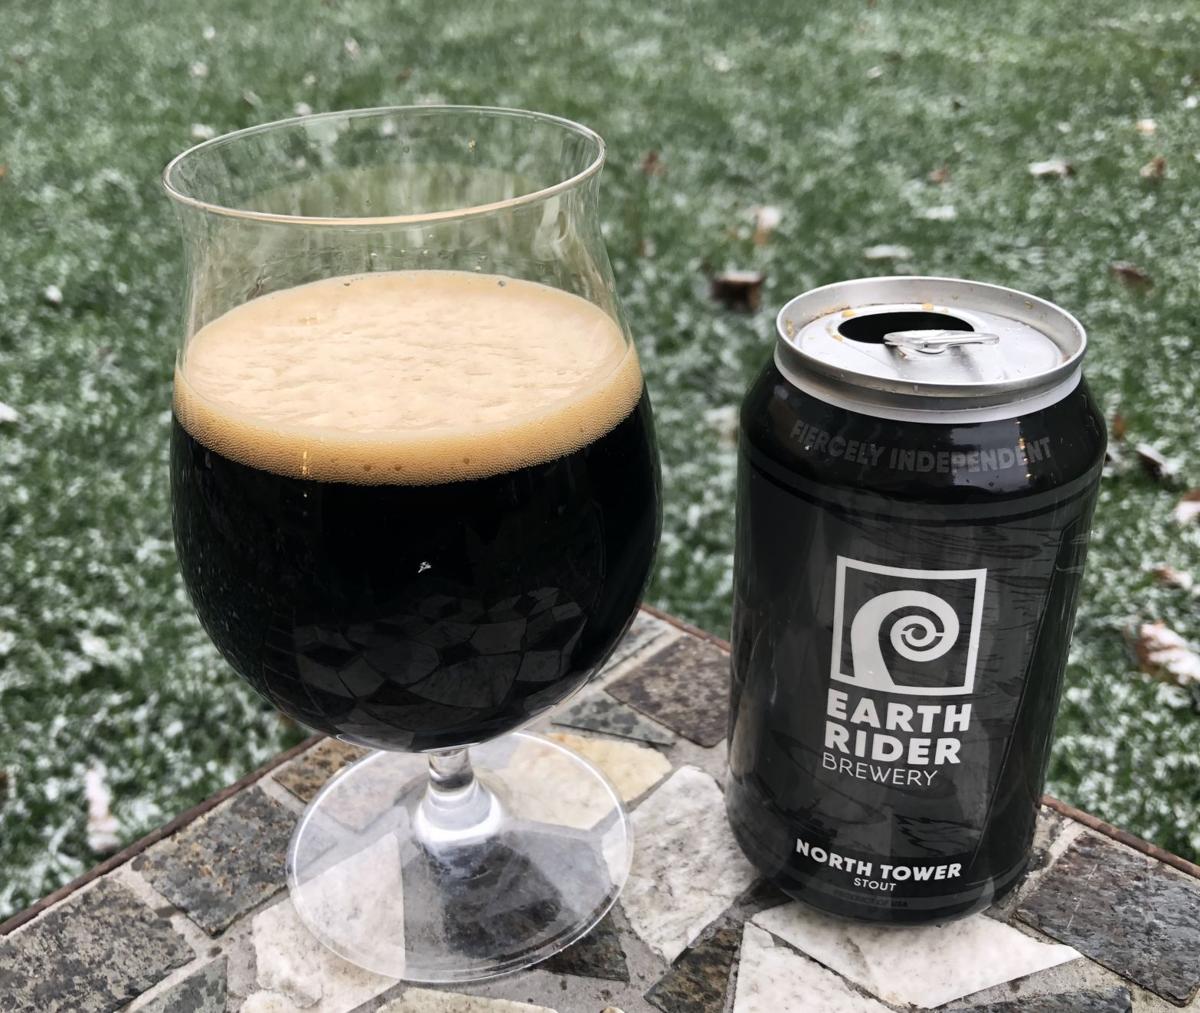 North Tower Stout